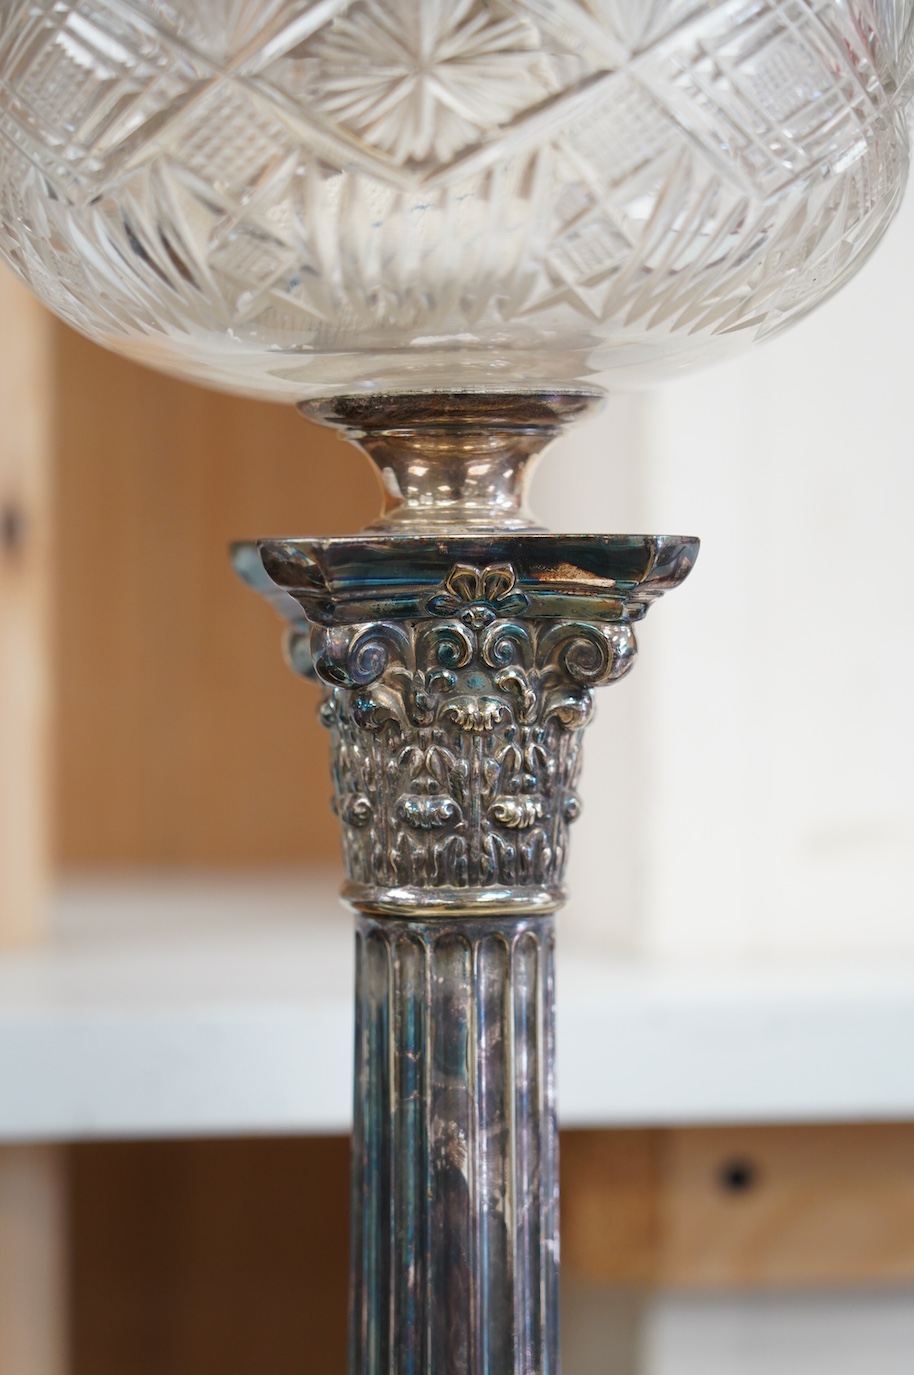 A silver plated oil lamp in the form of a Corinthian column with cut glass reservoir, 76cm high. Condition - fair to good, missing chimney and shade